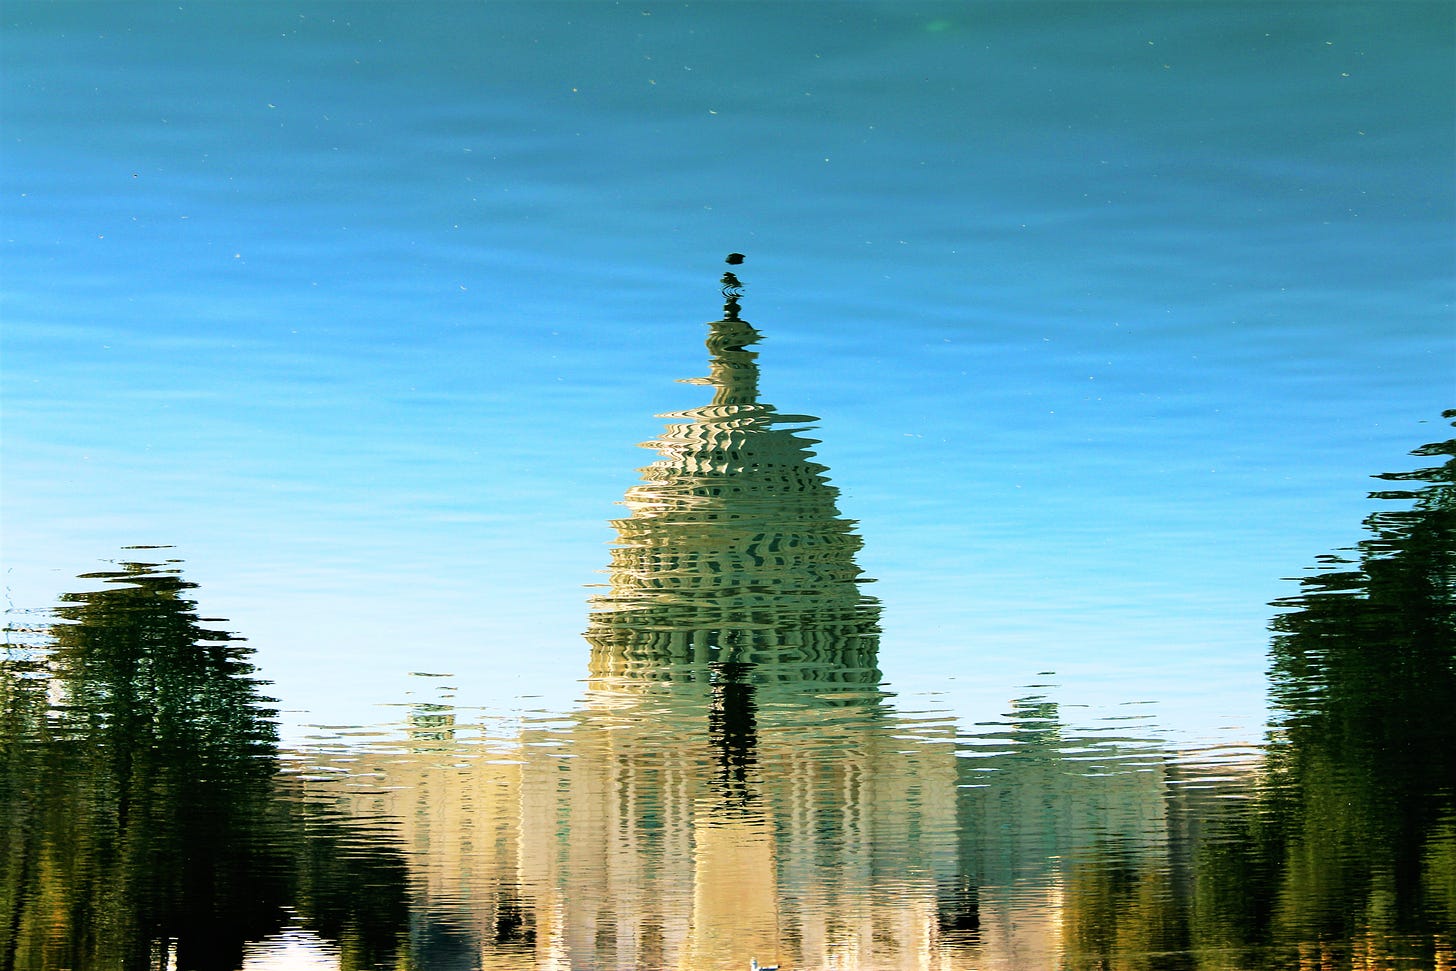 Photo by Kendall Hoopes: https://www.pexels.com/photo/reflection-of-gray-mosque-on-water-616852/